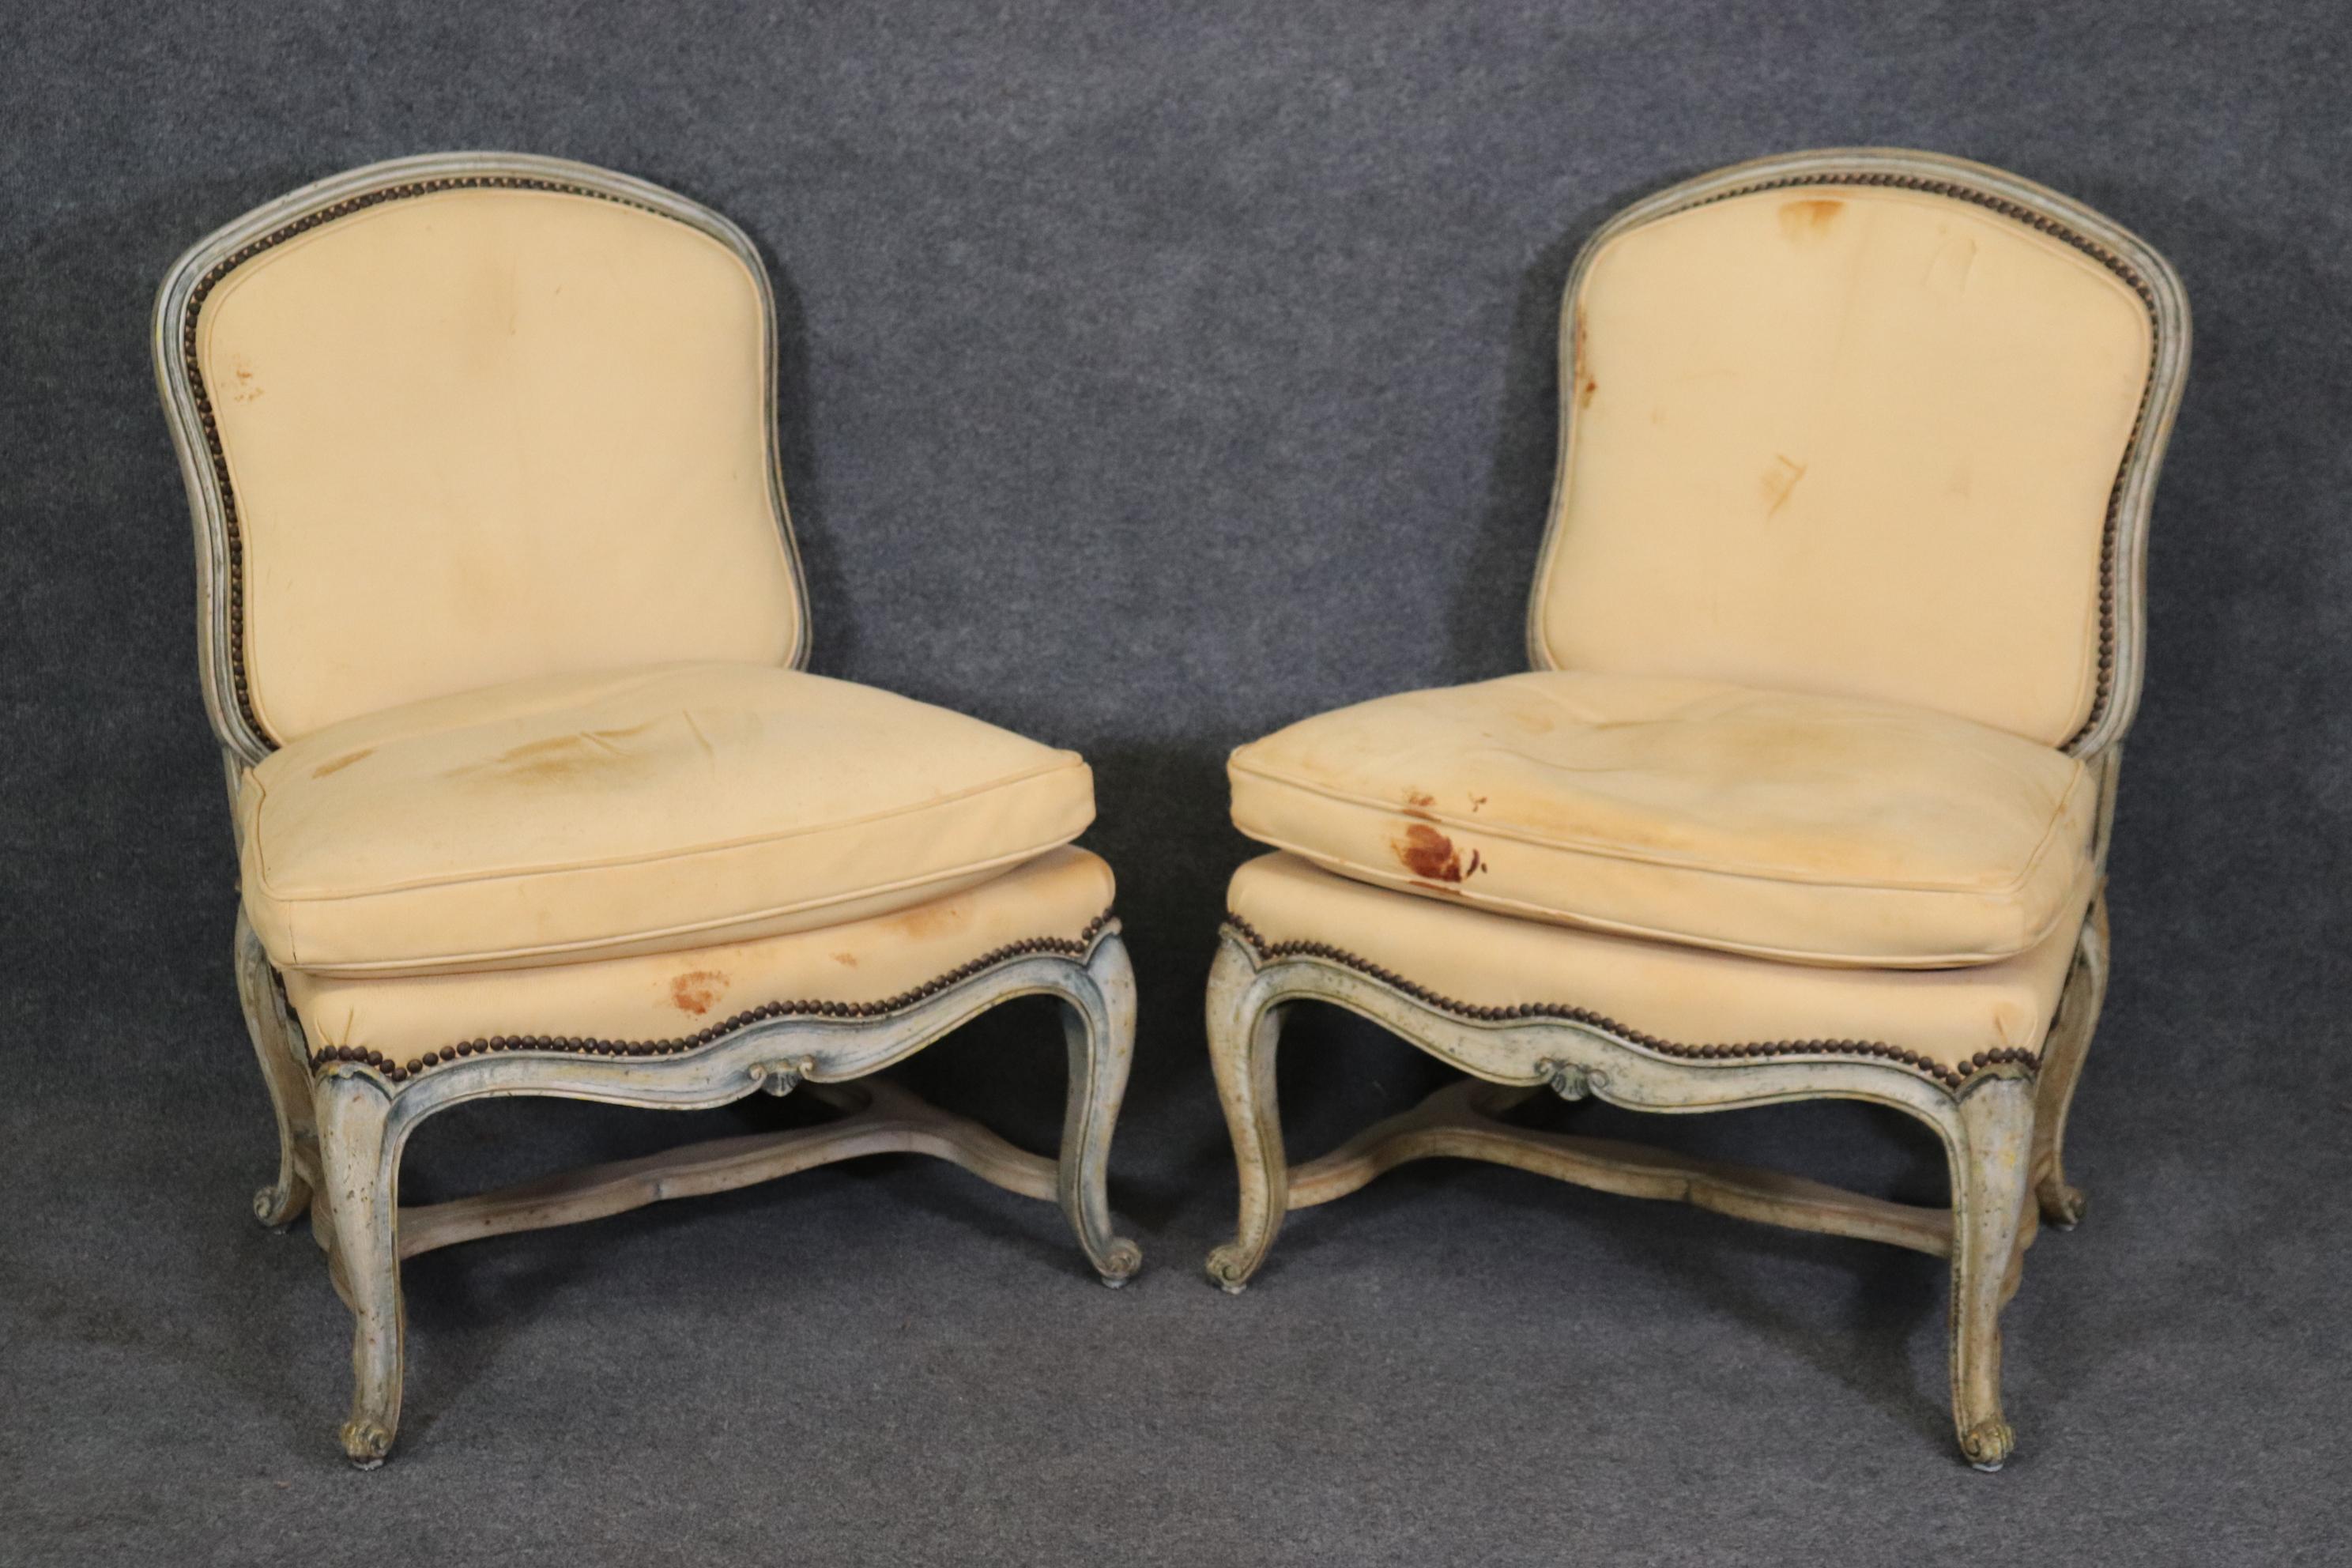 This is a gorgeous pair of genuine leather armless boudoir or bergere chairs. The chairs look antique but were made during the 1980s era. They are in their original stained and in one area, torn leather upholstery. The upholstery can be